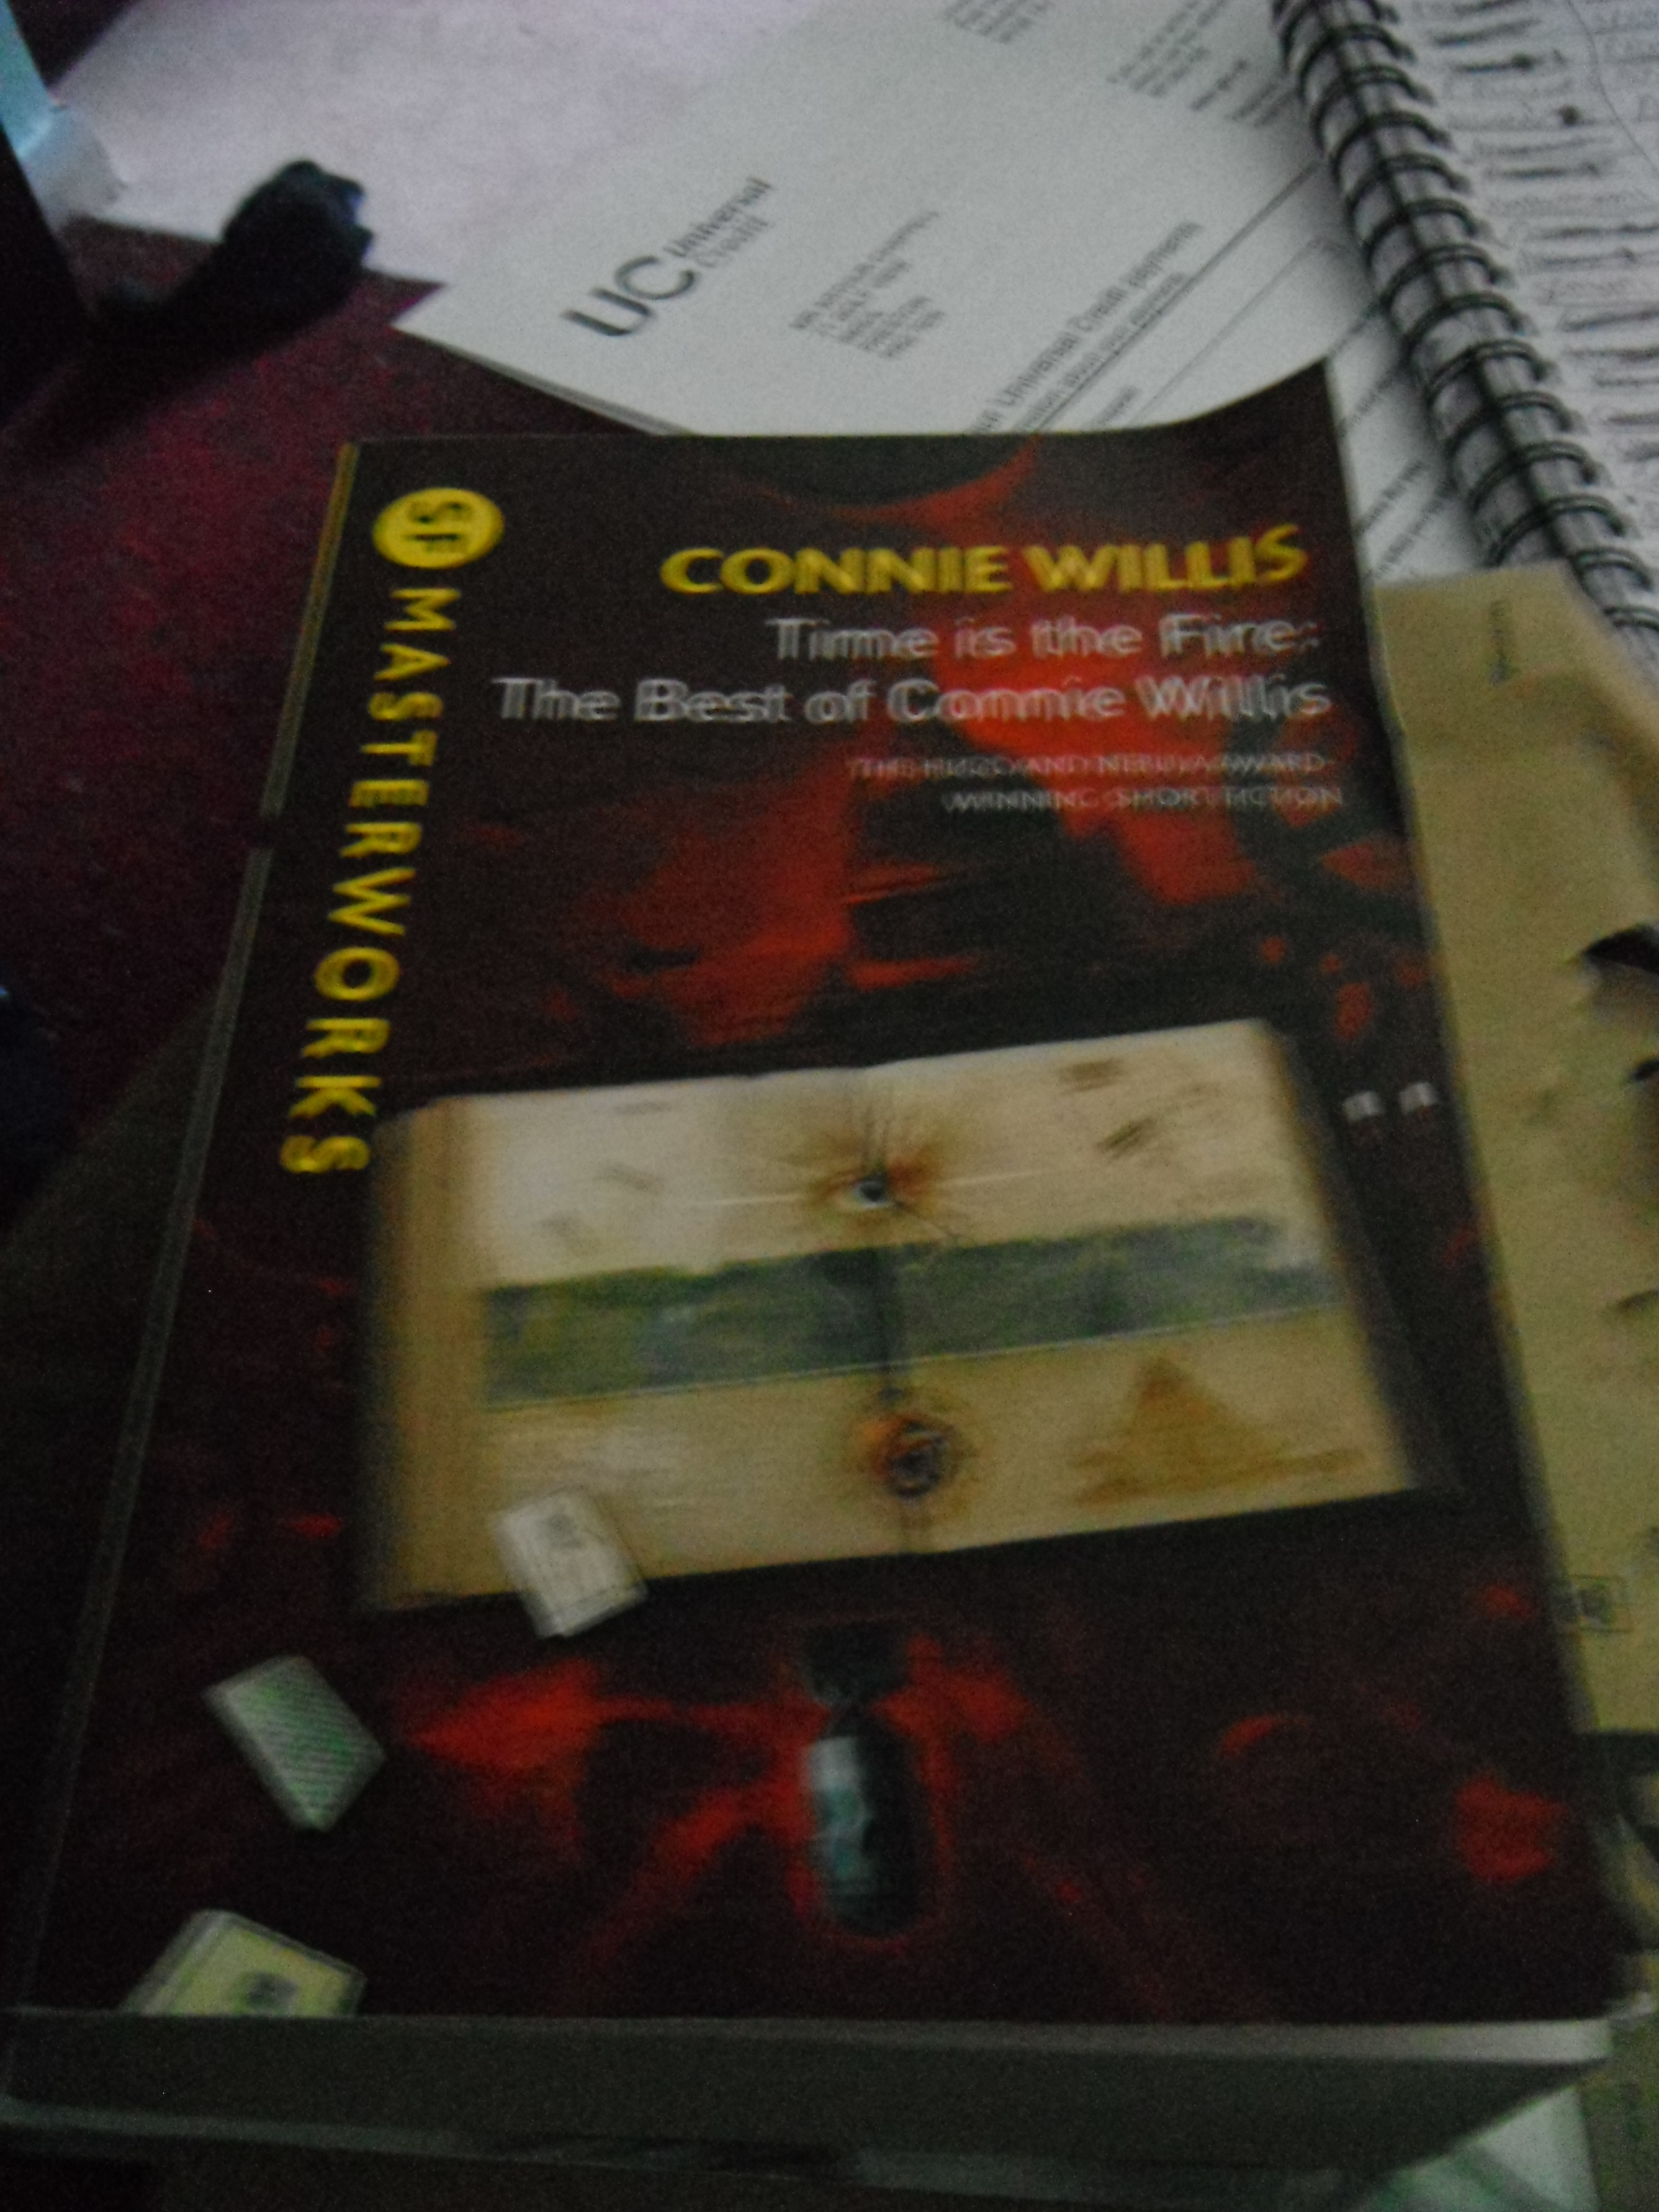 Photo taken by me – cover art to Connie Willis’s Time Is The Fire 